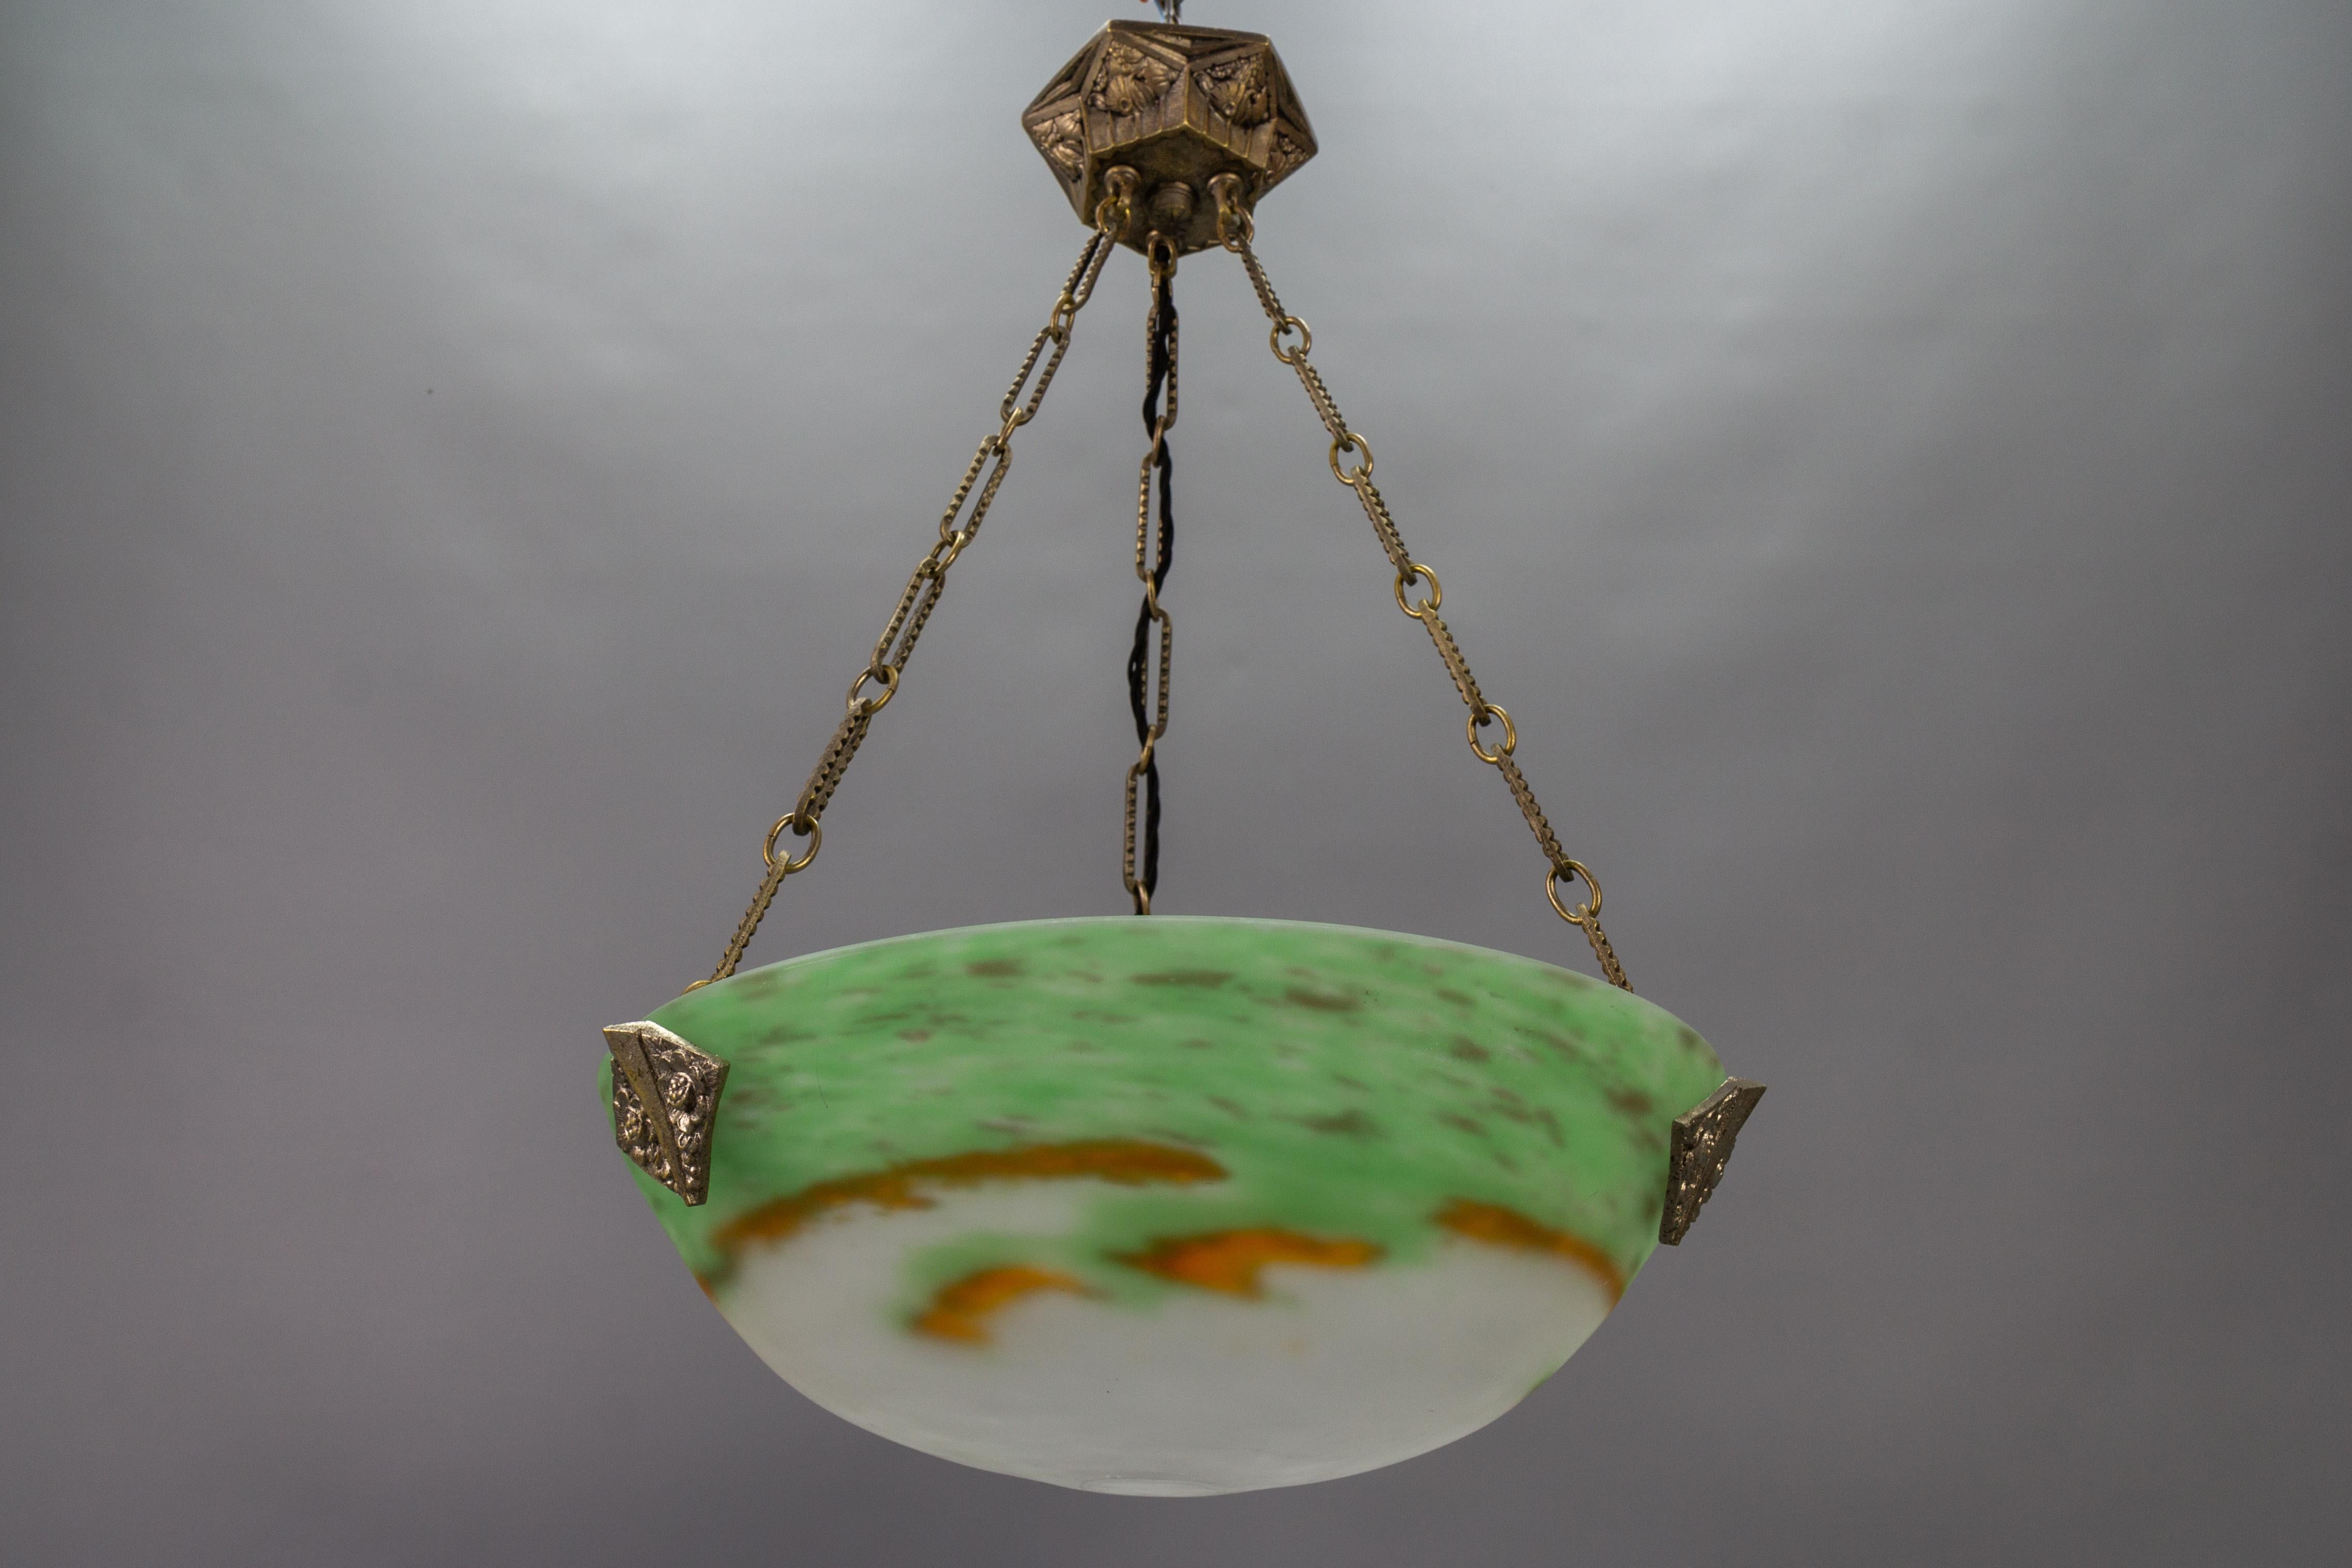 French Art Deco Green Glass Pendant Light by Muller Frères Luneville, 1920s For Sale 8